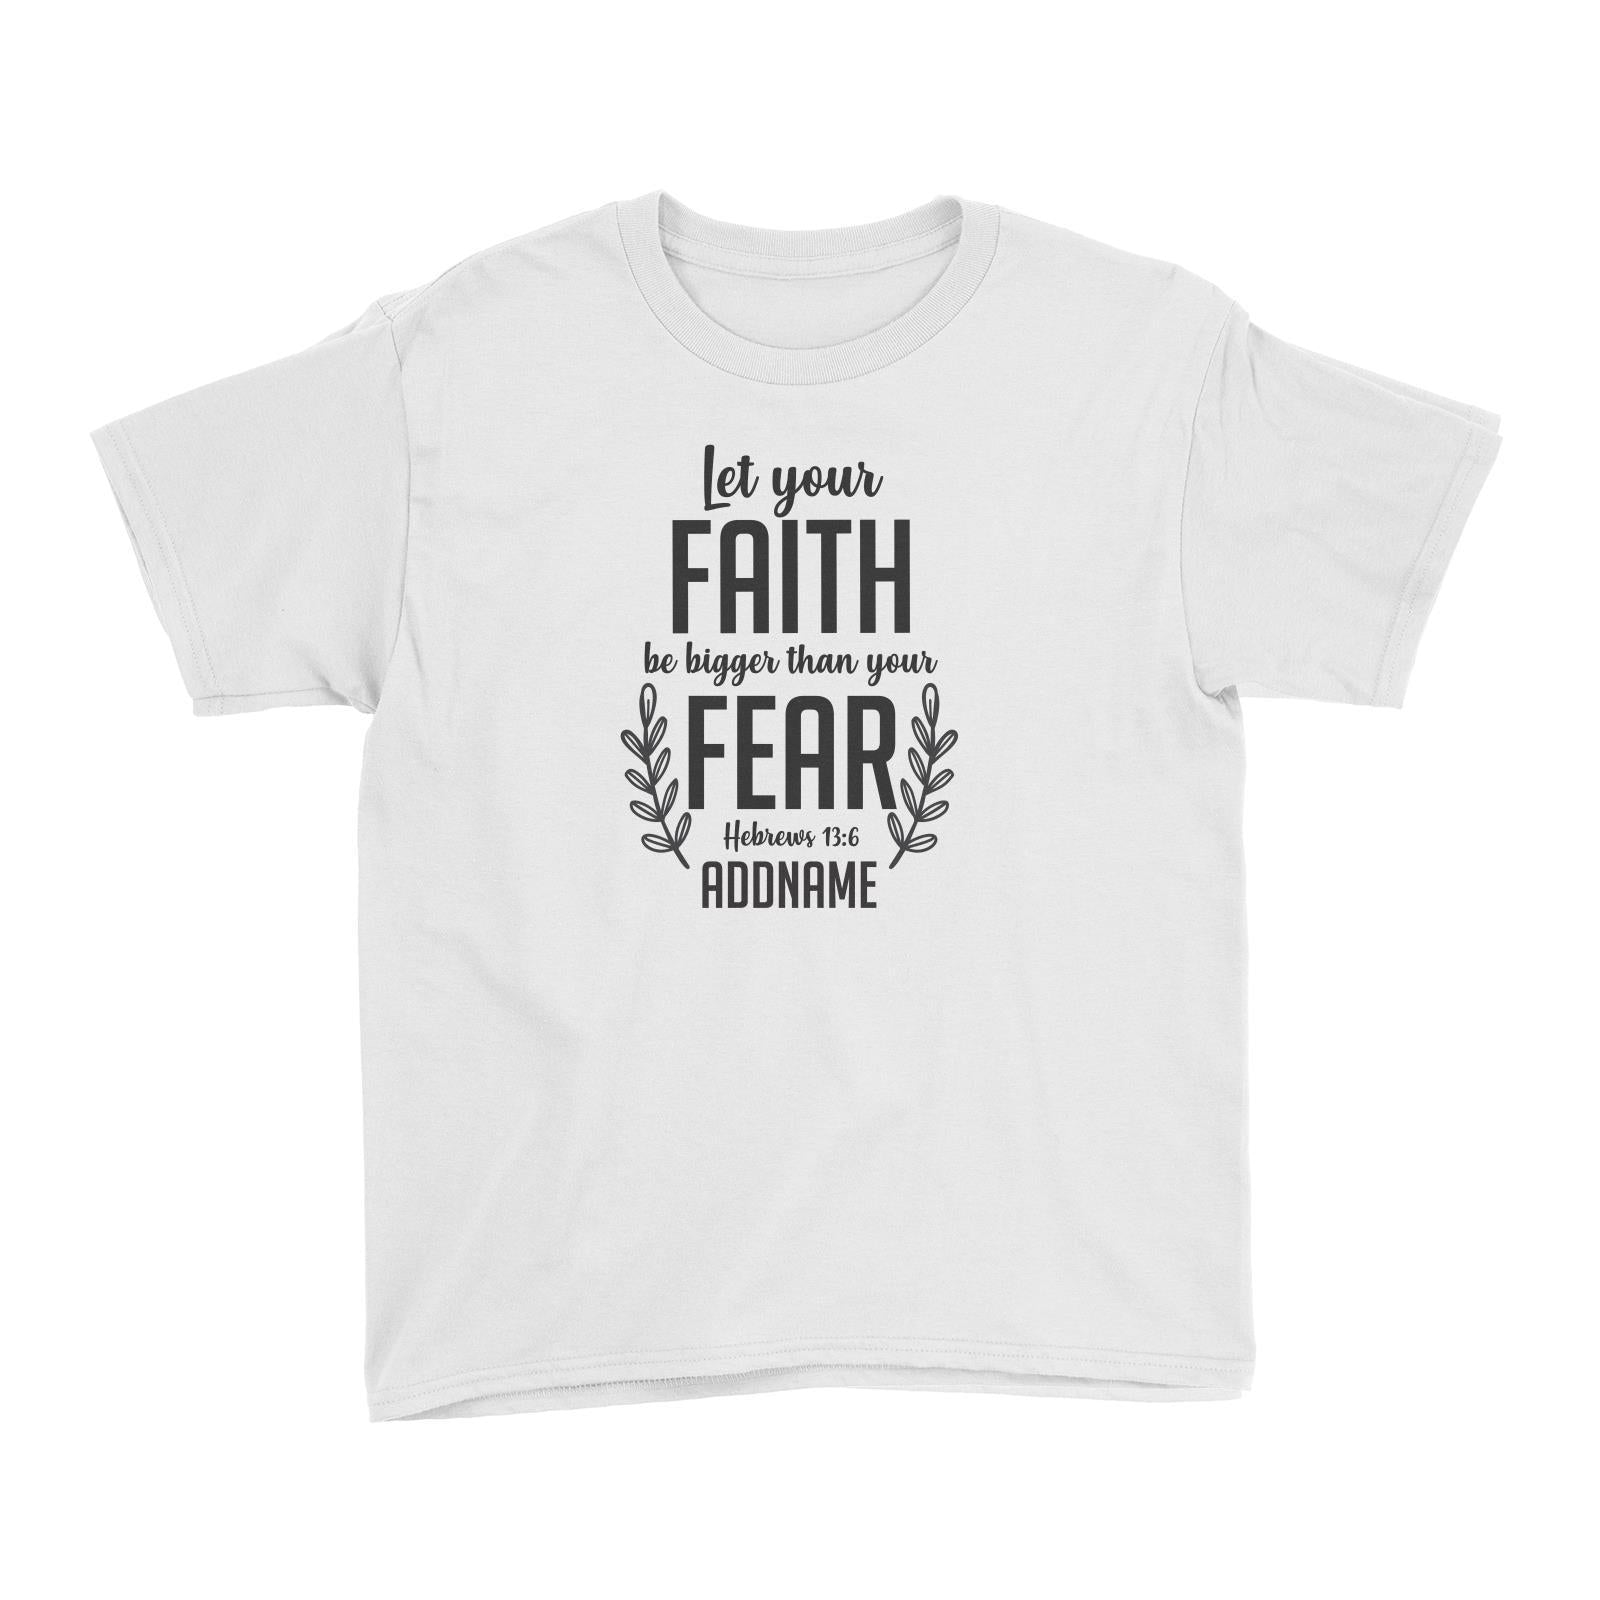 Christ Newborn Let Your Faith Be Bigger Than Your Fear Hebrews 13.6 Addname Kid's T-Shirt